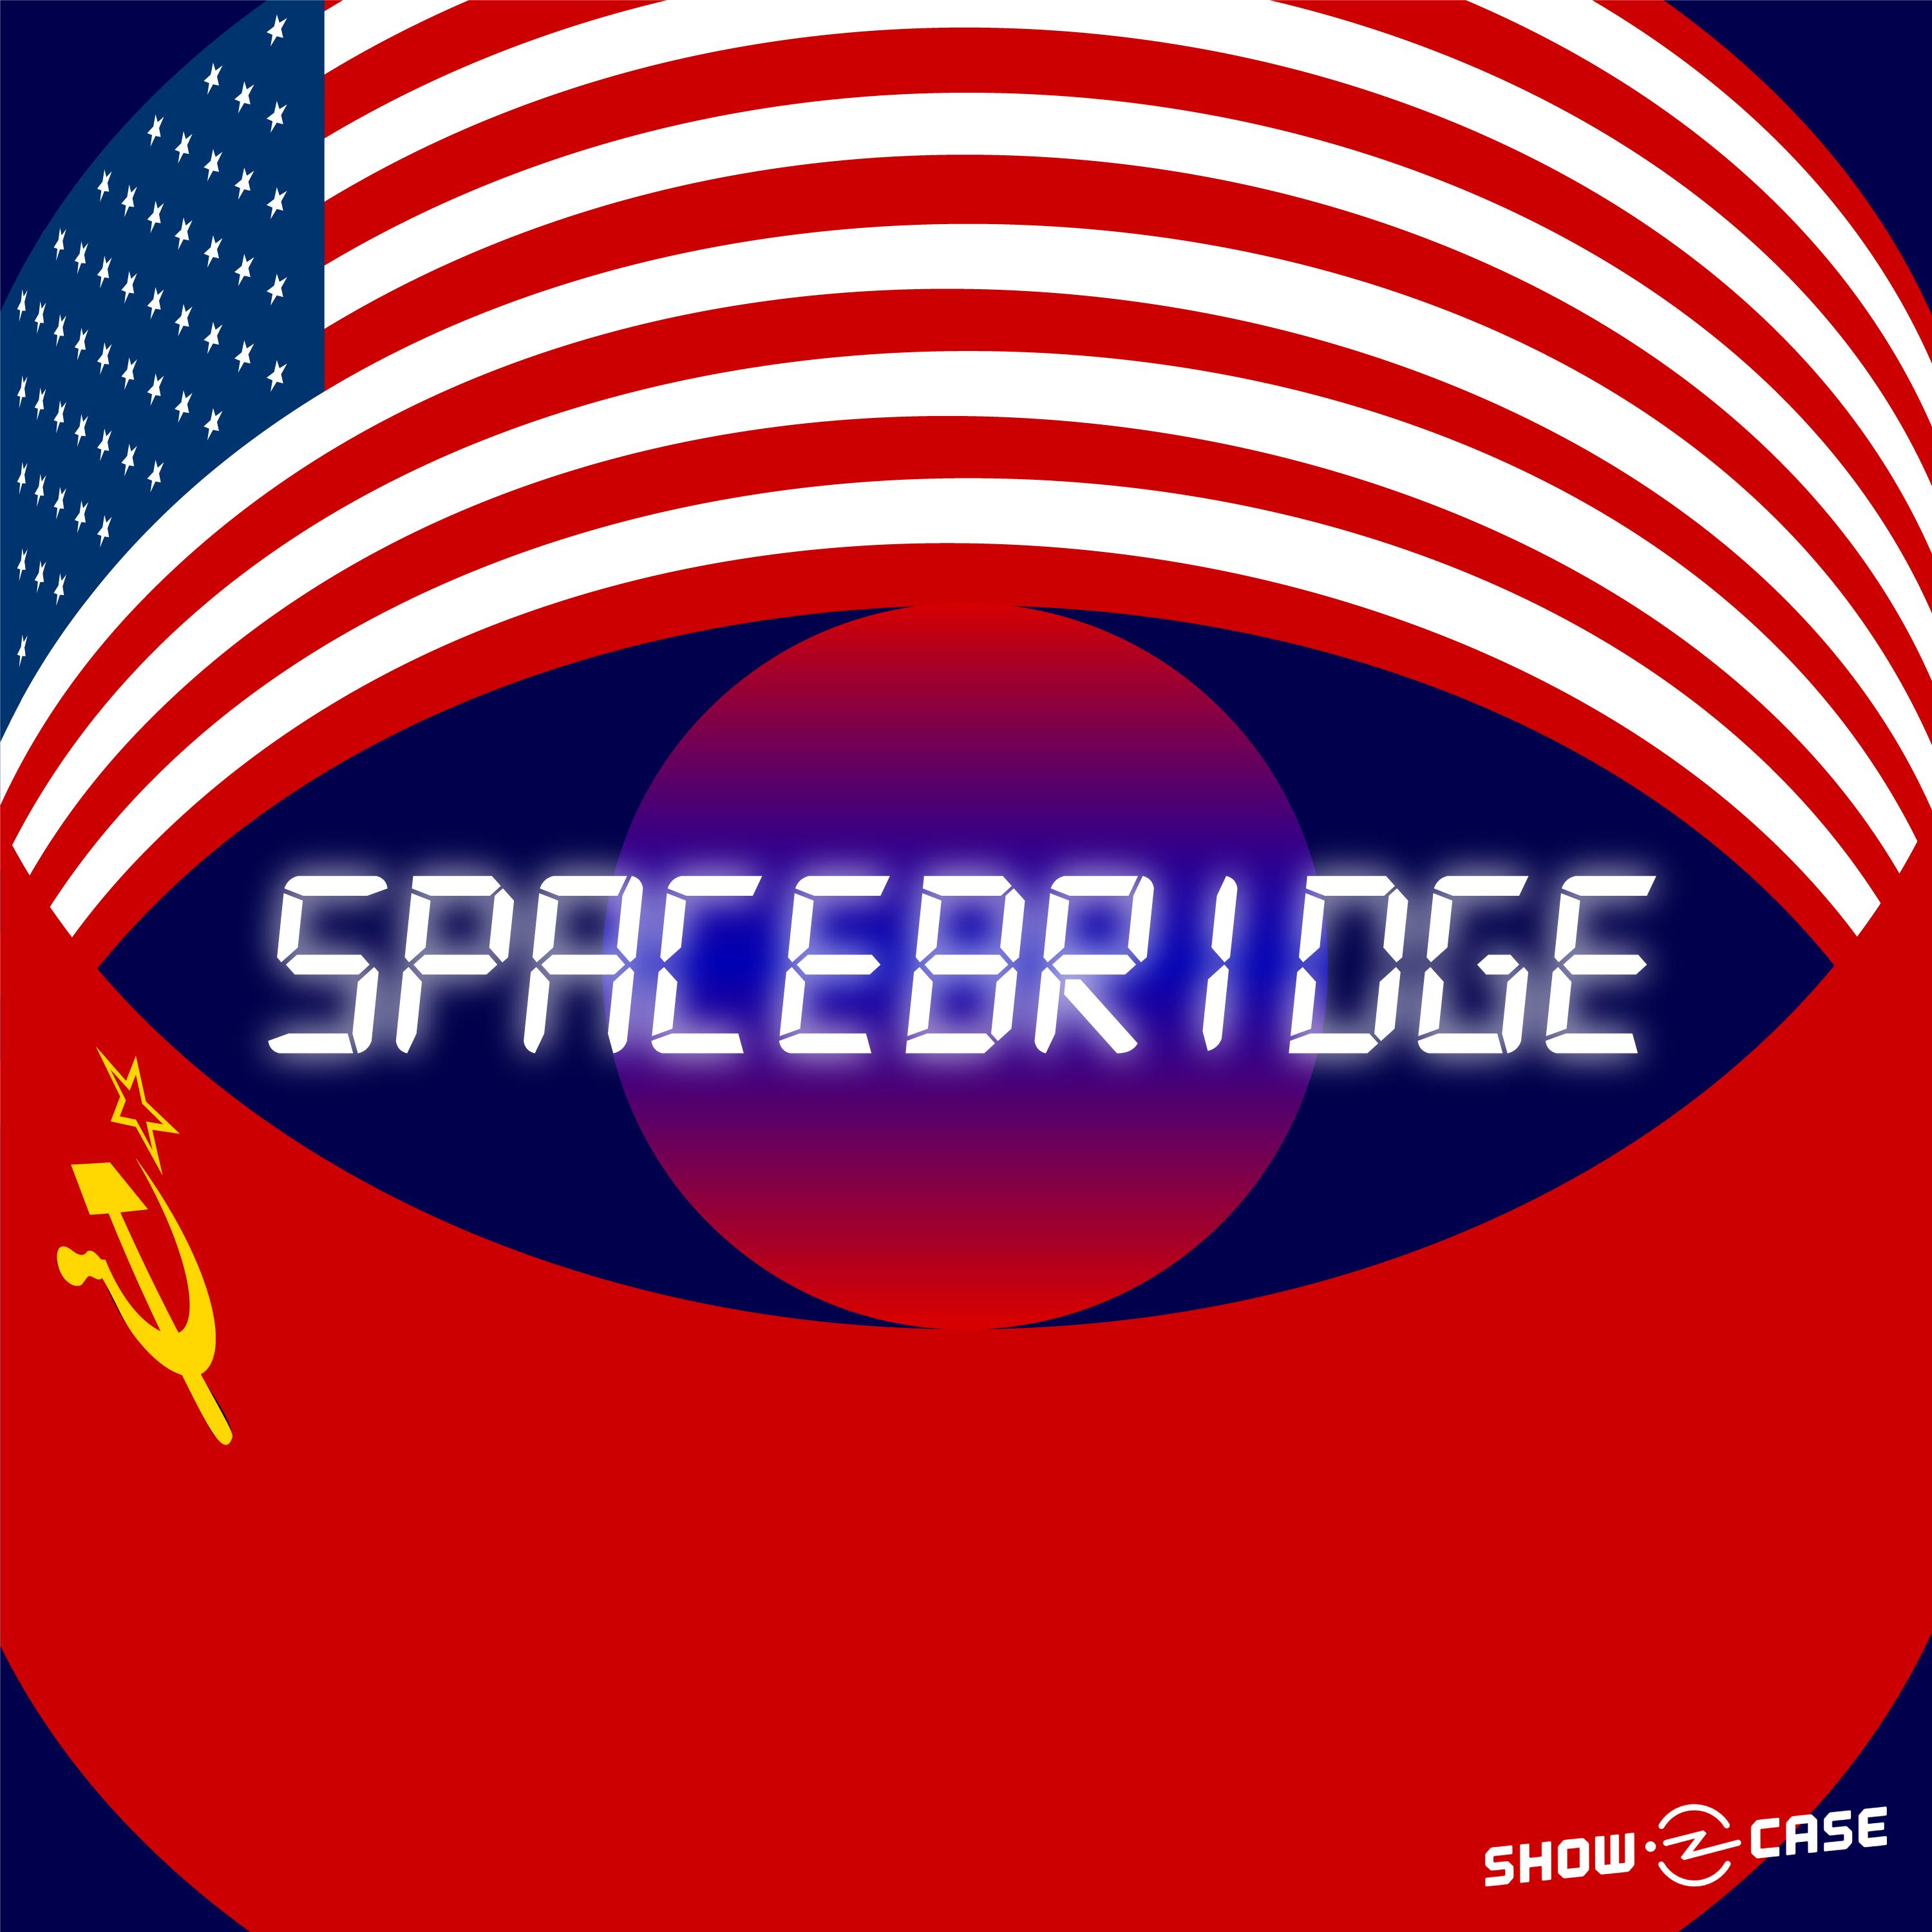 Thumbnail for "Spacebridge #2 – Foreign Policy According to Freud".